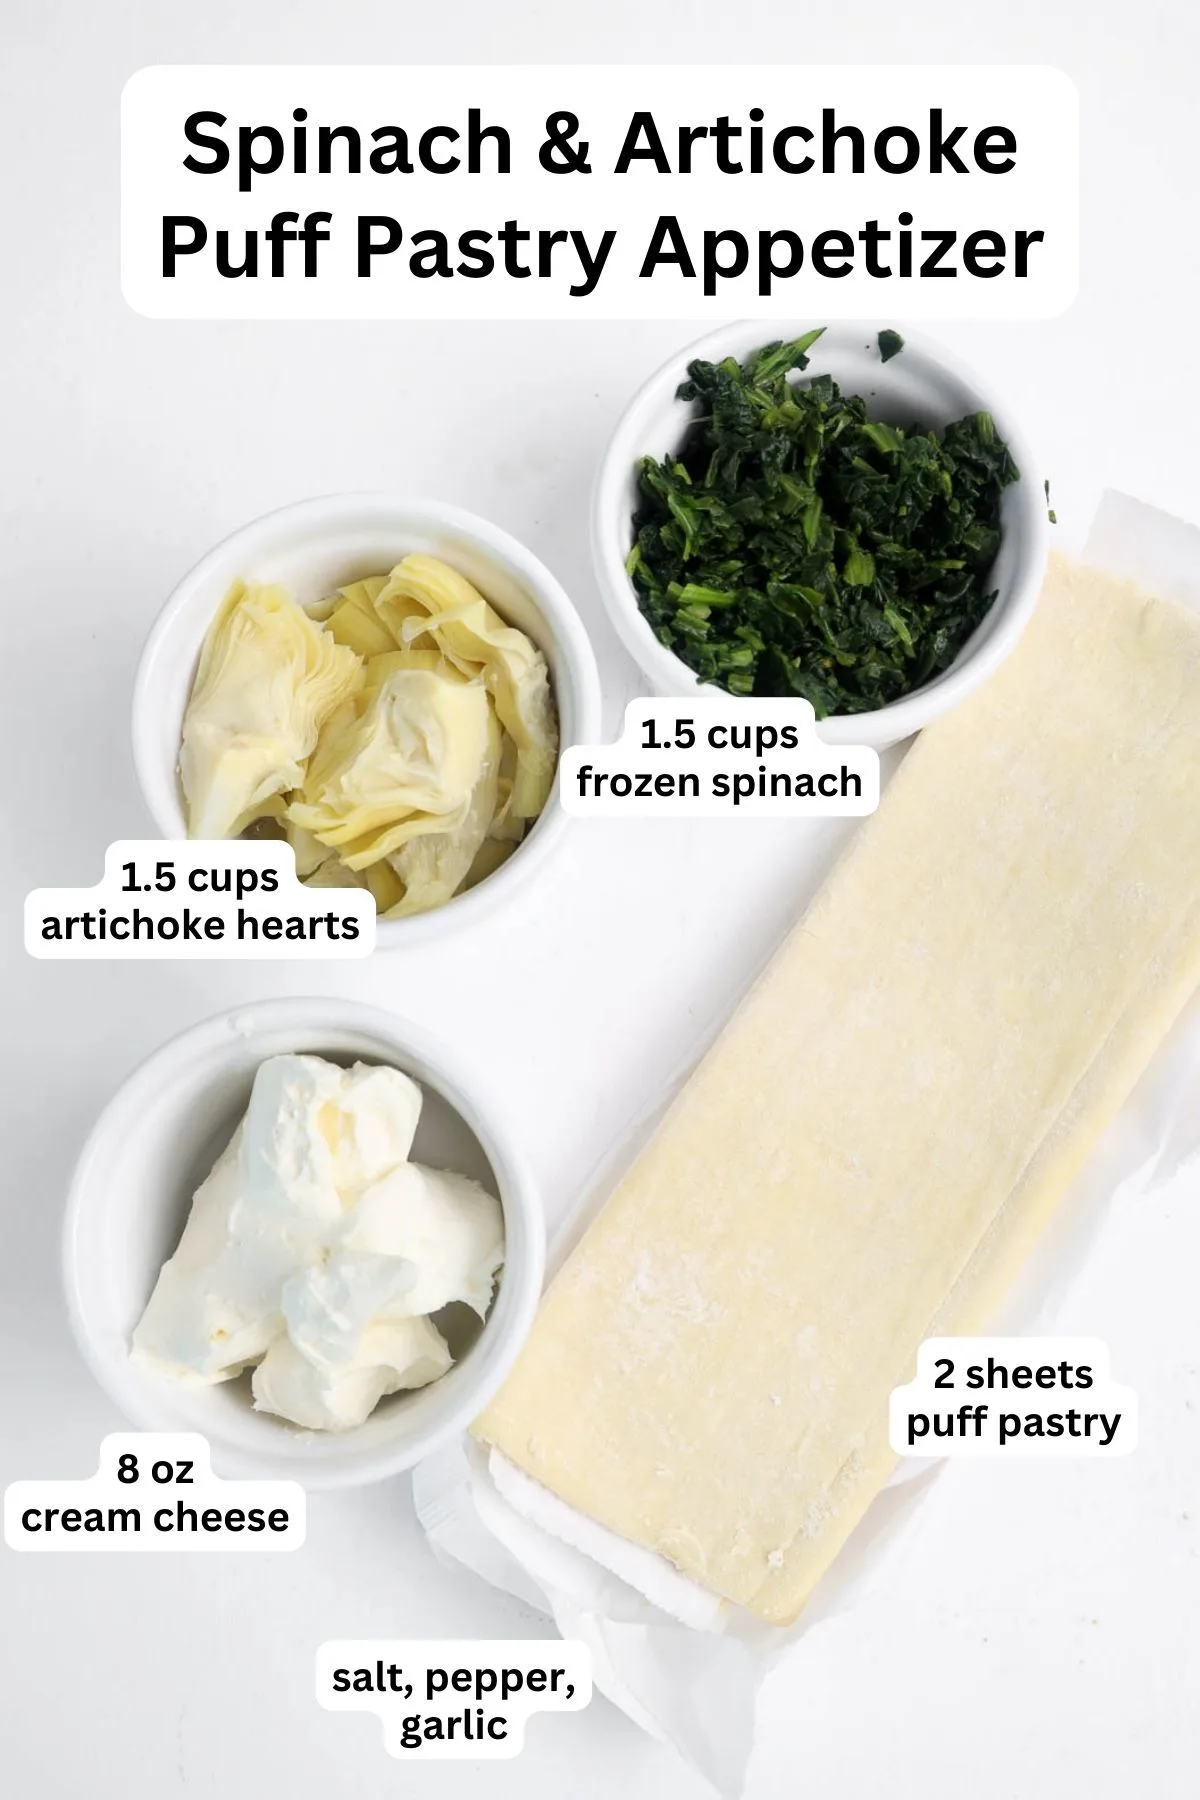 Ingredients to make spinach artichoke puff pastries